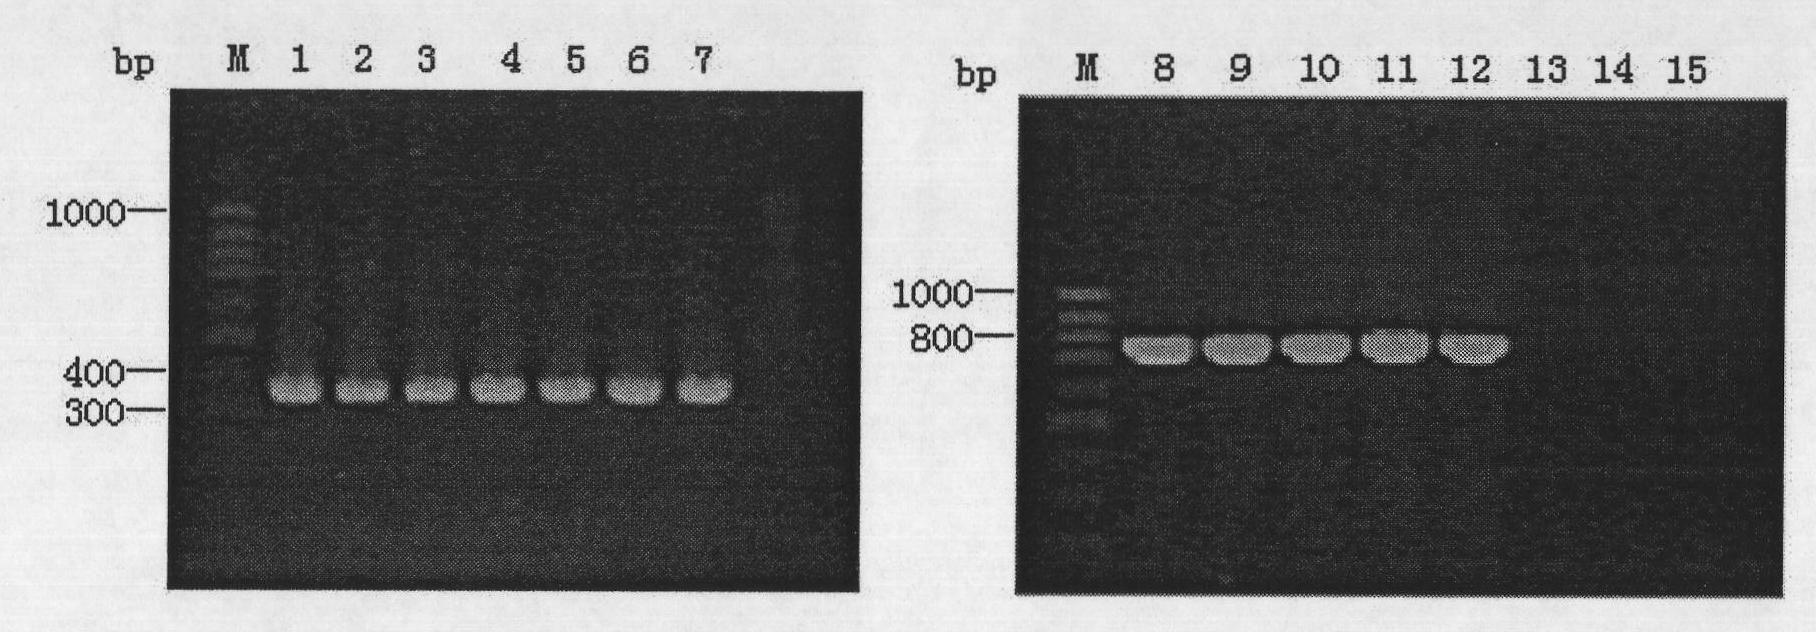 Method for detecting burkholderia cepacia flora on fruits or vegetables and identifying seeds